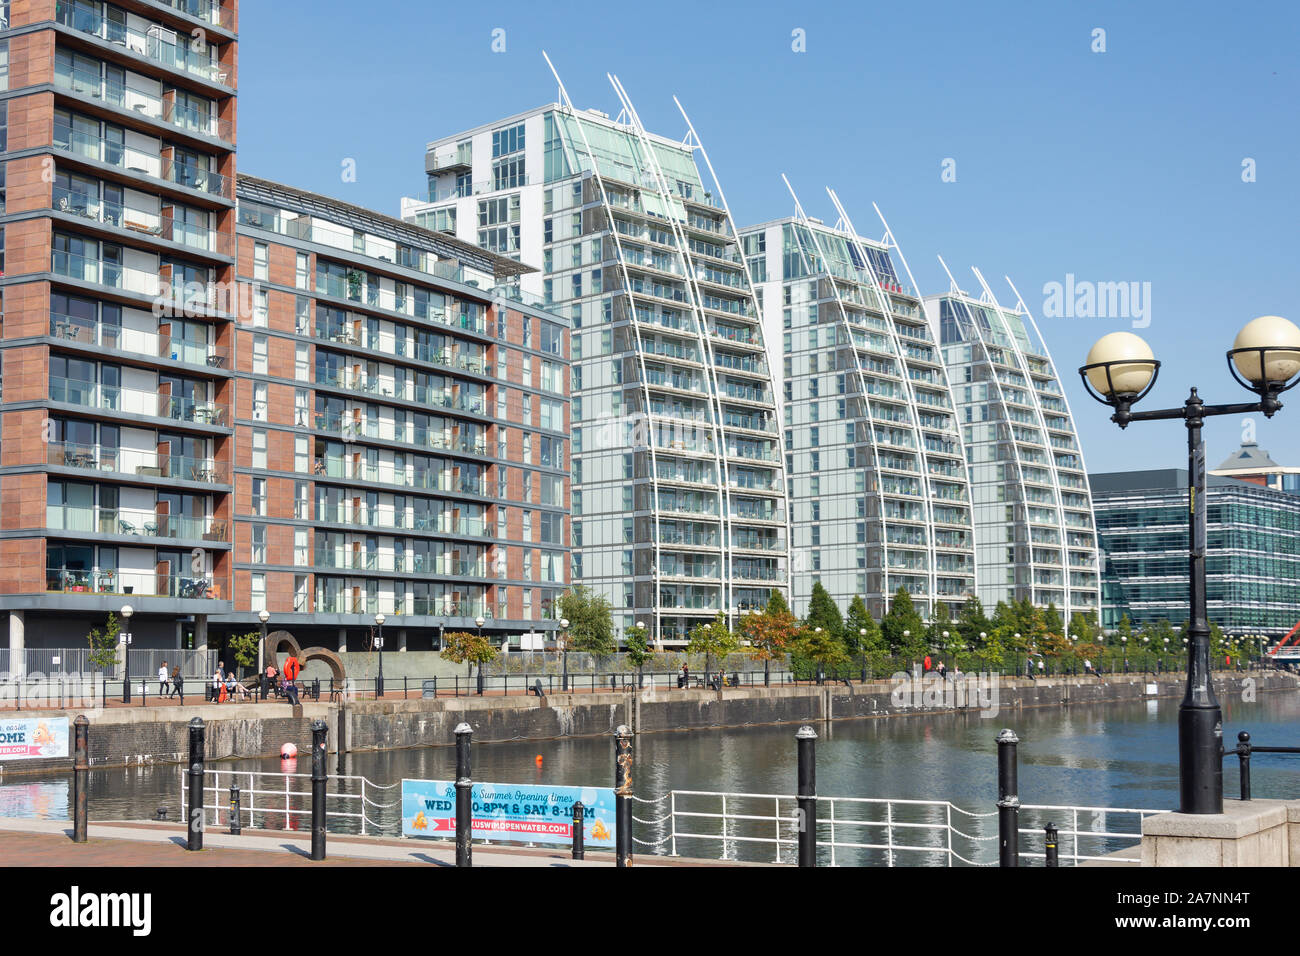 L'NV des tours d'habitation, Salford Quays, Salford, Manchester, Greater Manchester, Angleterre, Royaume-Uni Banque D'Images